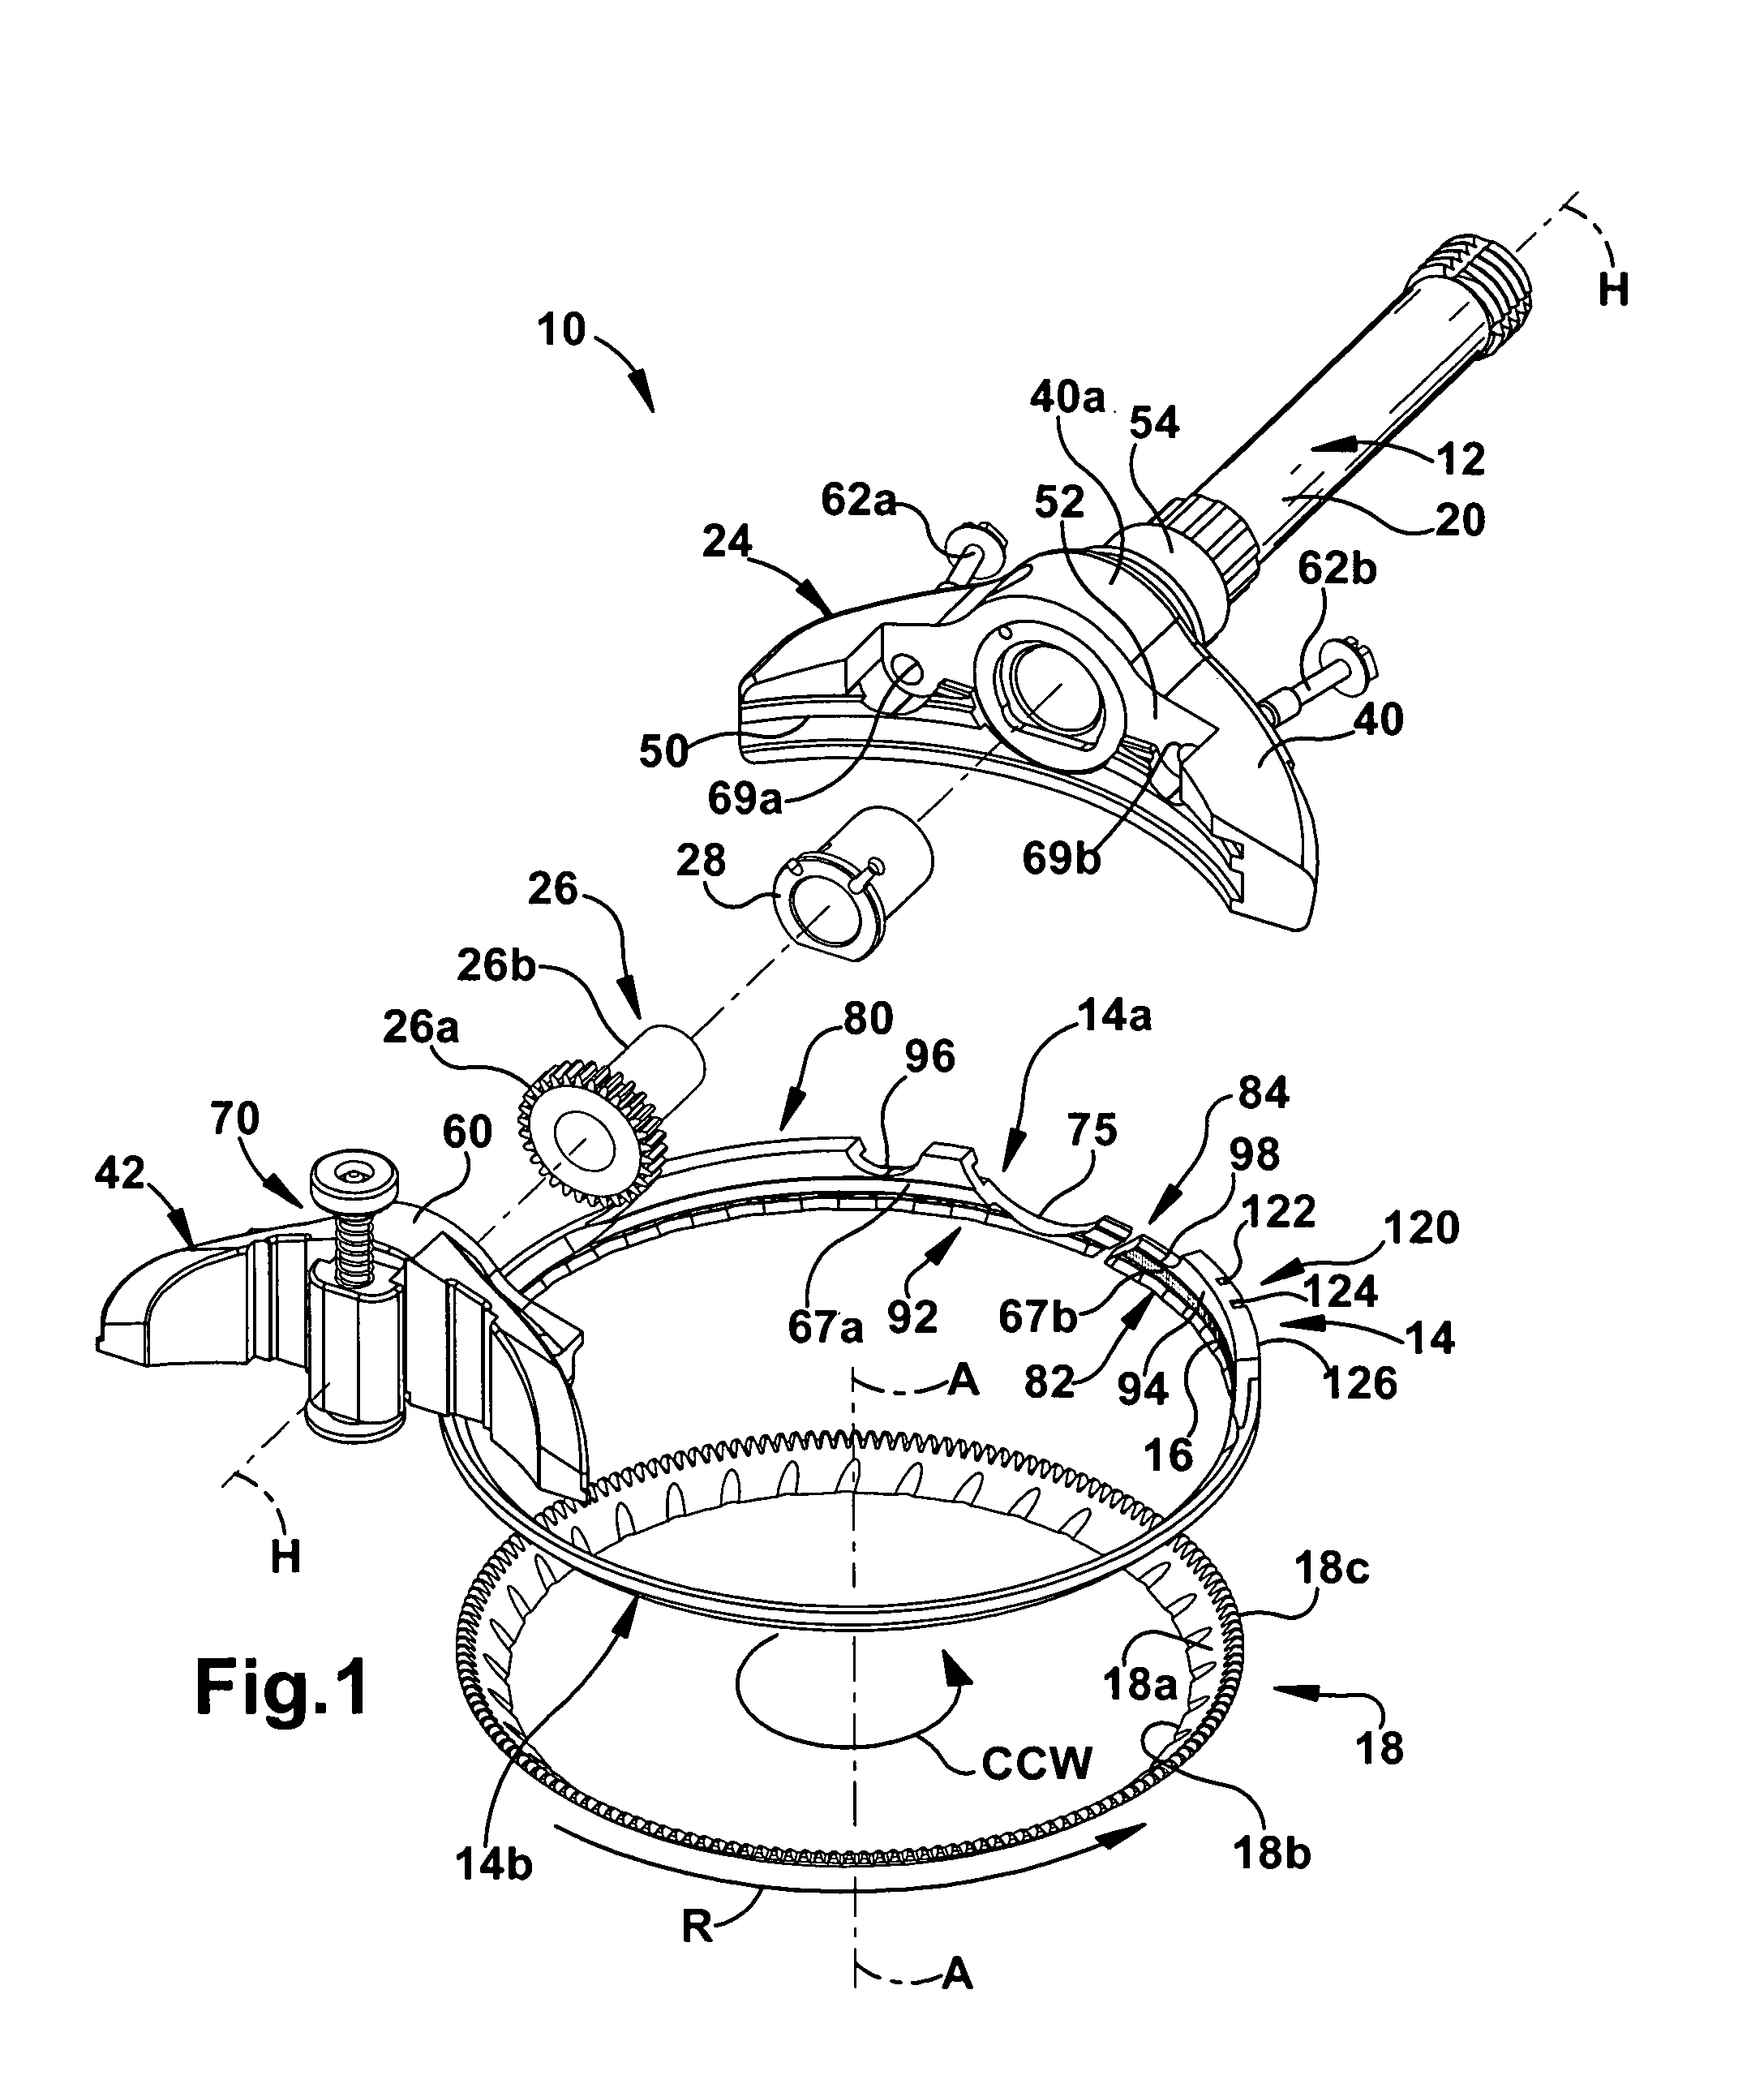 Split blade housing for power operated rotary knife